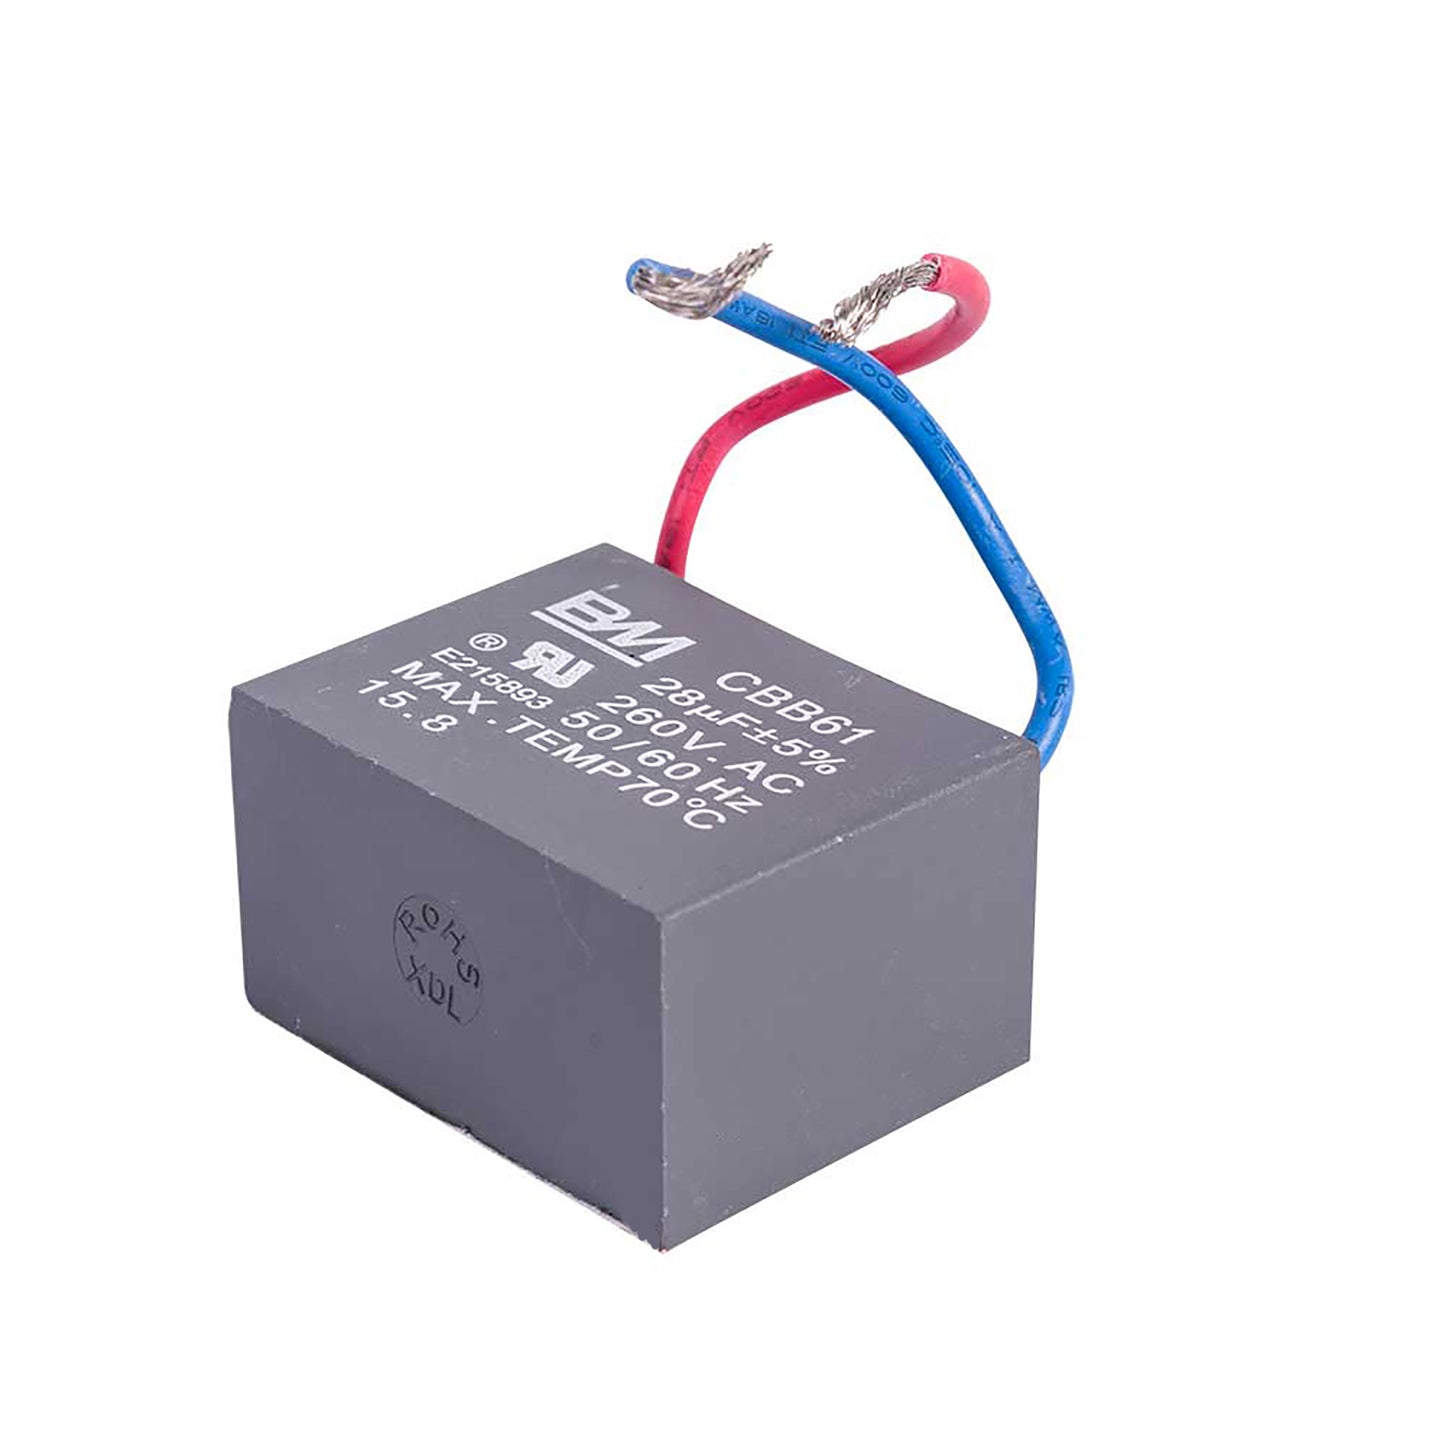 Capacitor for BR-6 Inflatable Blower